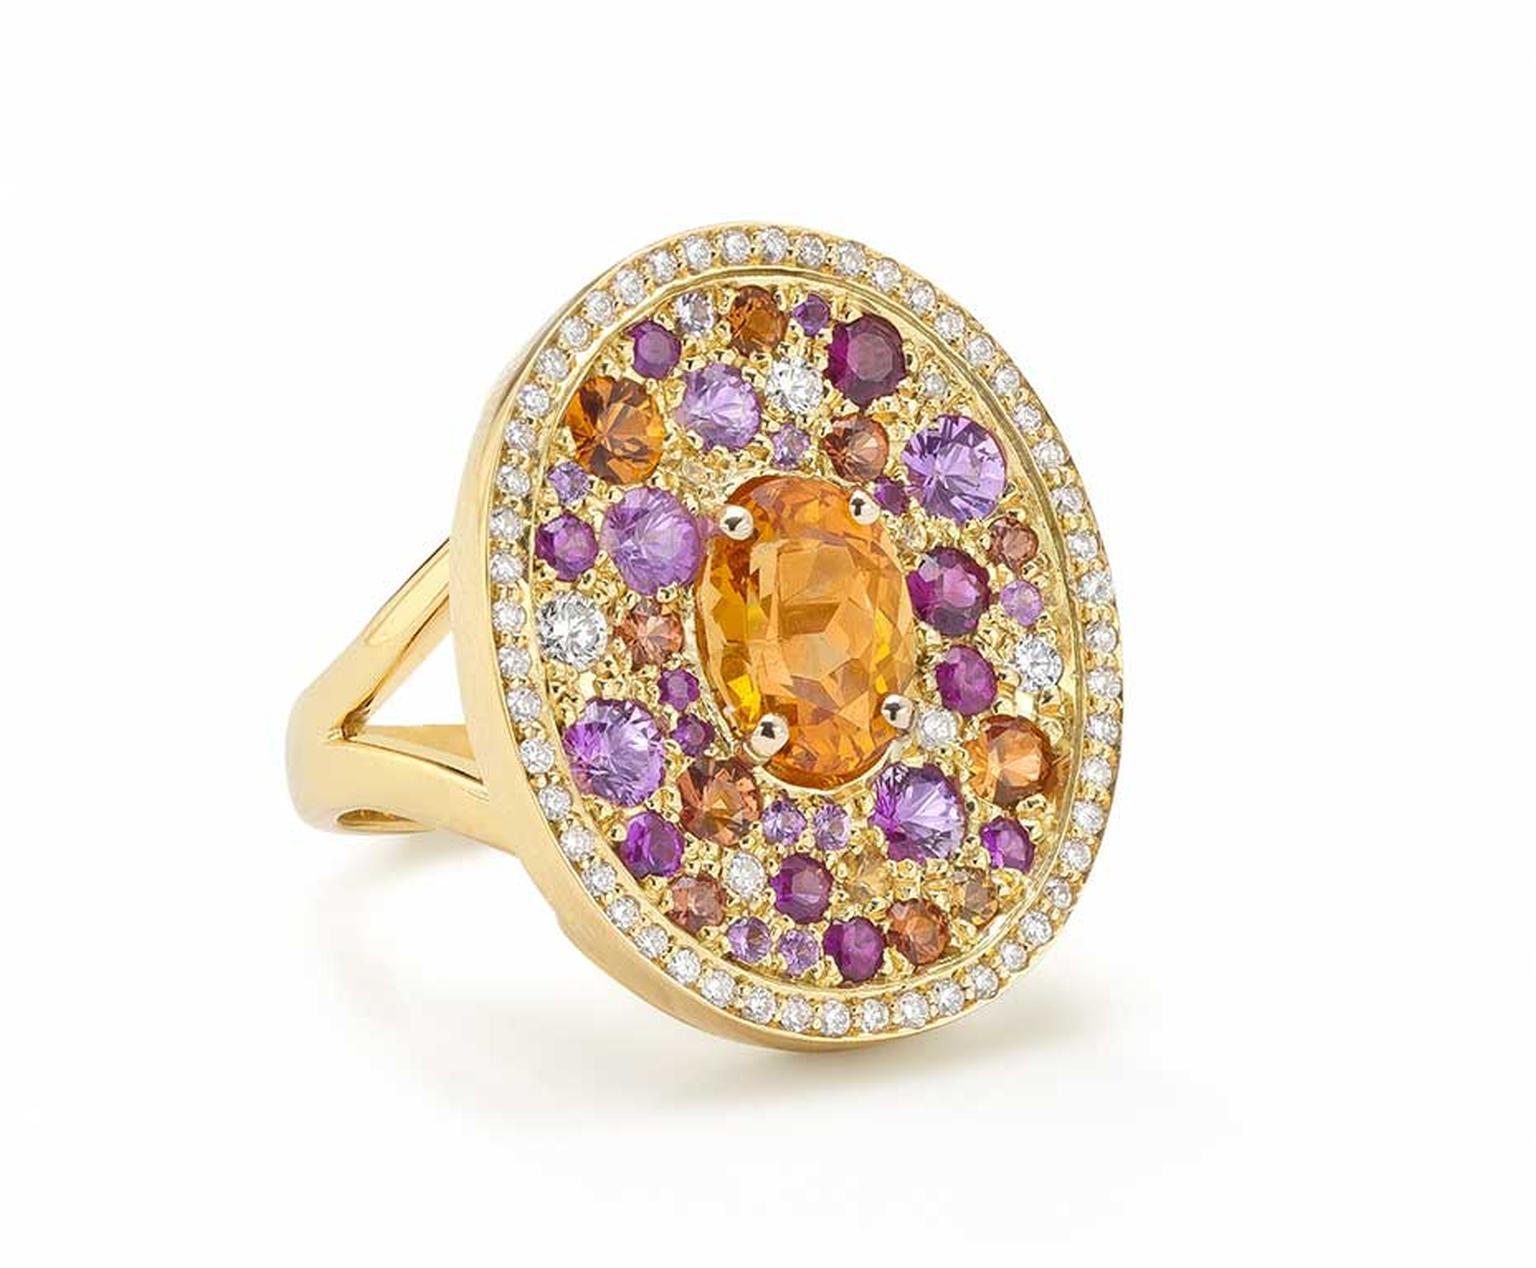 Robinson Pelham white gold Volcano Asteroid ring featuring a central oval mandarin garnet surrounded by a pavé of diamonds, rubies and yellow, orange and pink sapphires.